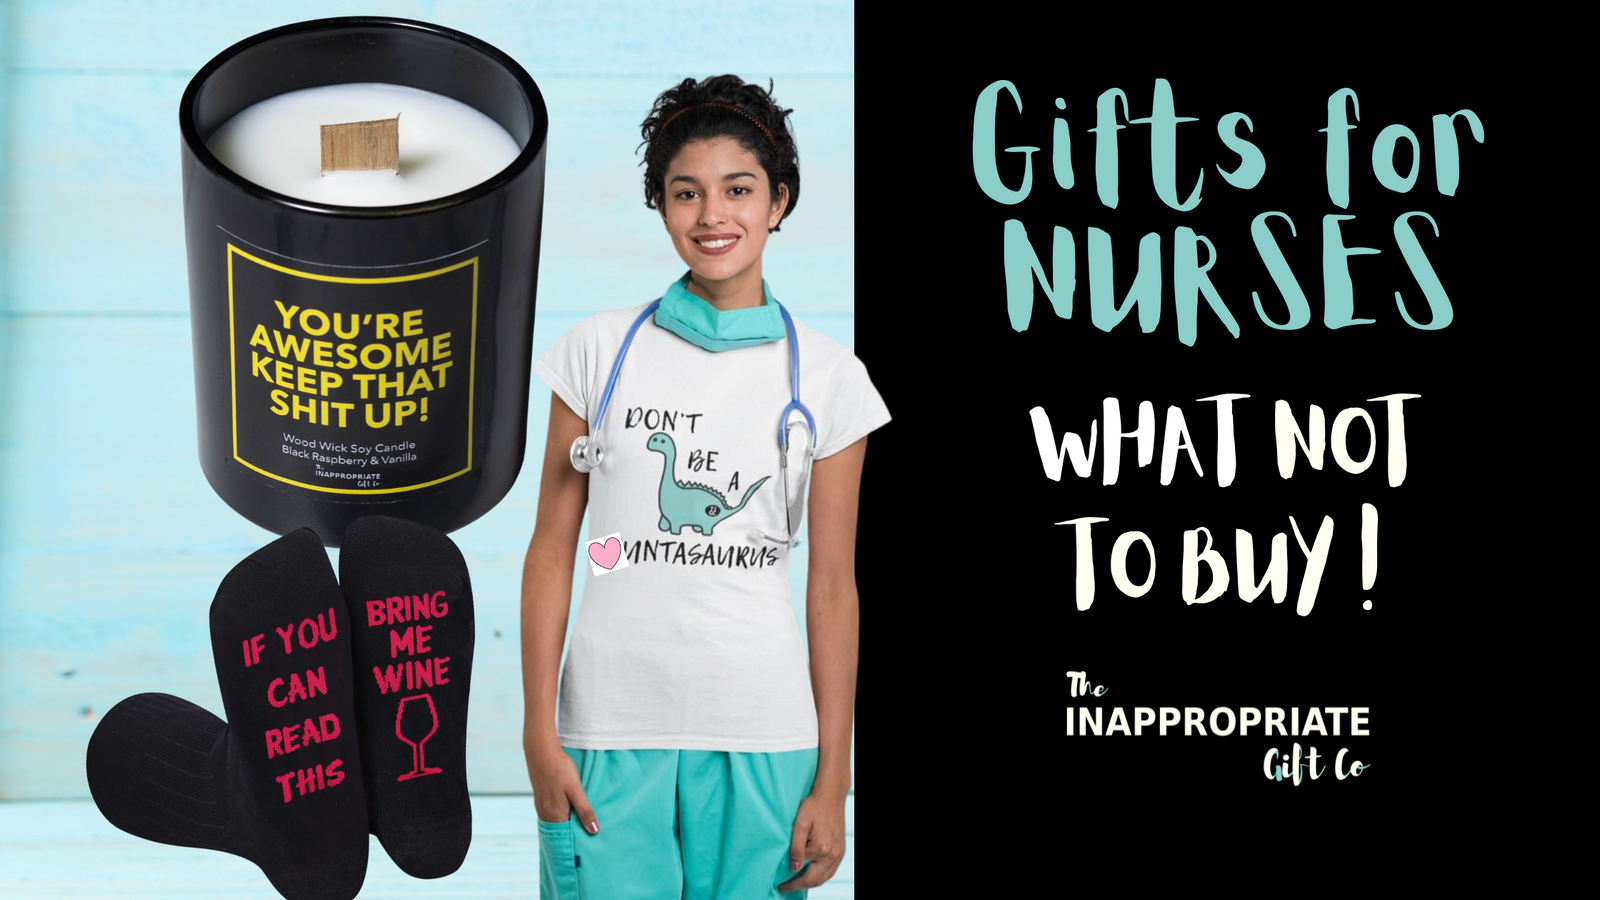 Nurse Gifts - Gifts Not To Buy A Nurse. - The Inappropriate Gift Co